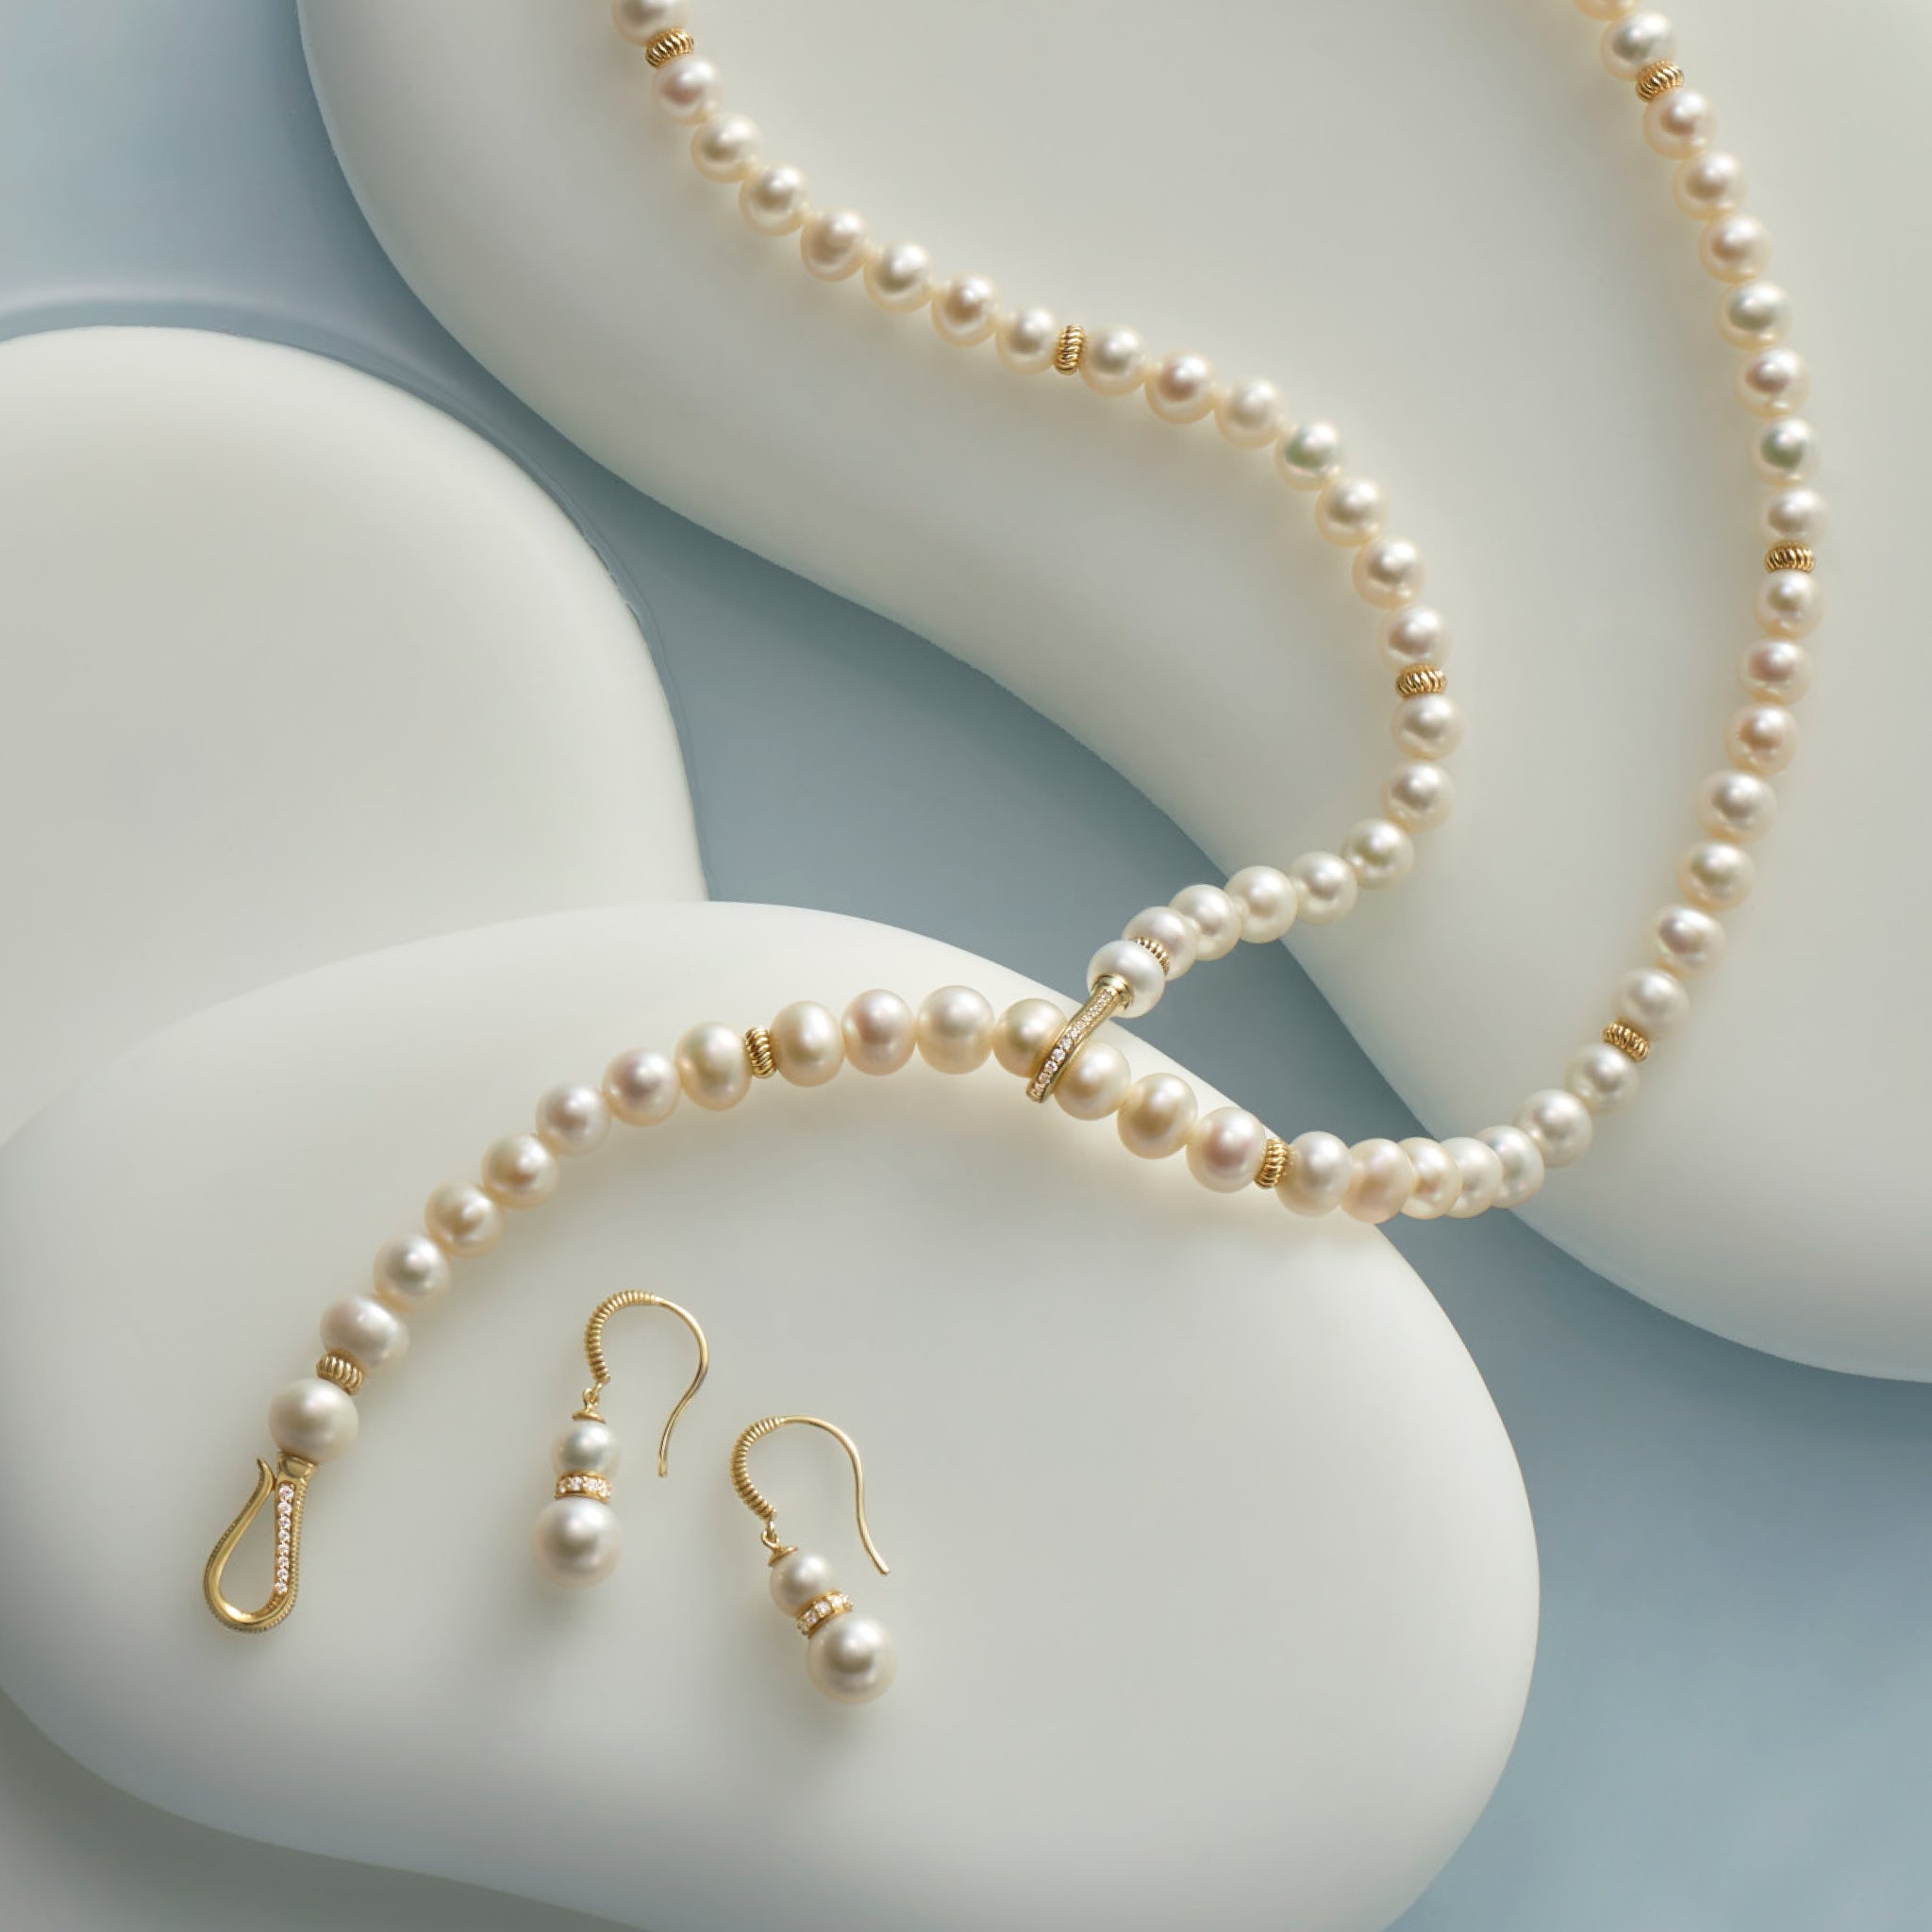 Shima Double Hook Drop Necklace with Freshwater Pearls and Diamonds in 18K